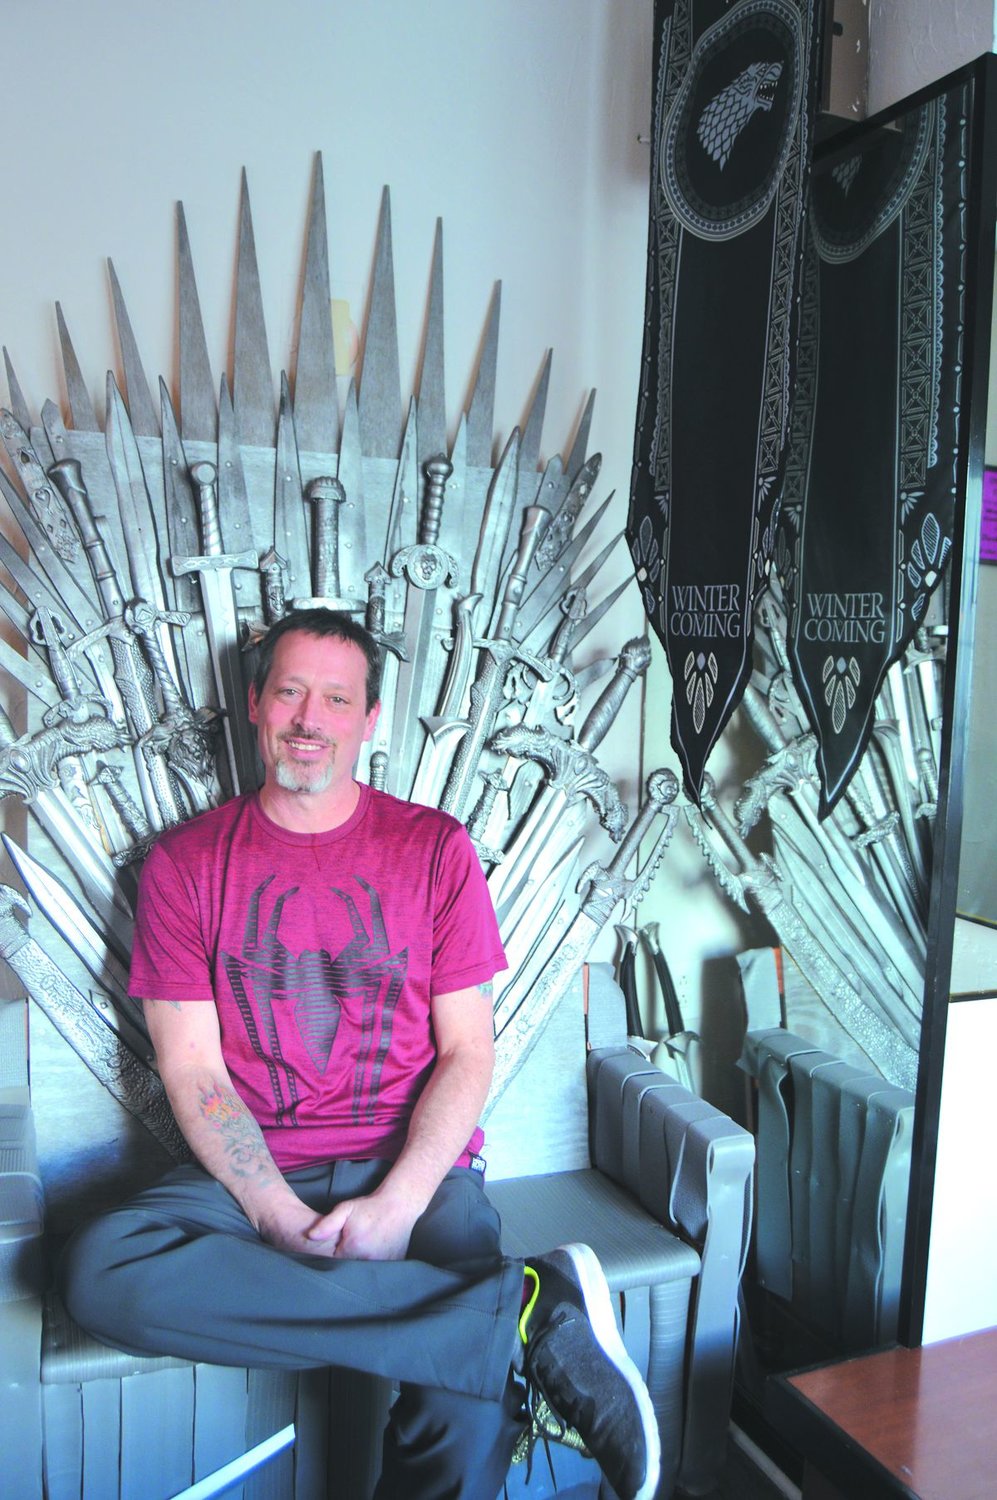 Brent Tutwiler sits in his replica of the Game of Thrones throne that he built for his pop culture-themed tavern, Pop Inn in Chalfont. Photograph by Susan Yeske.